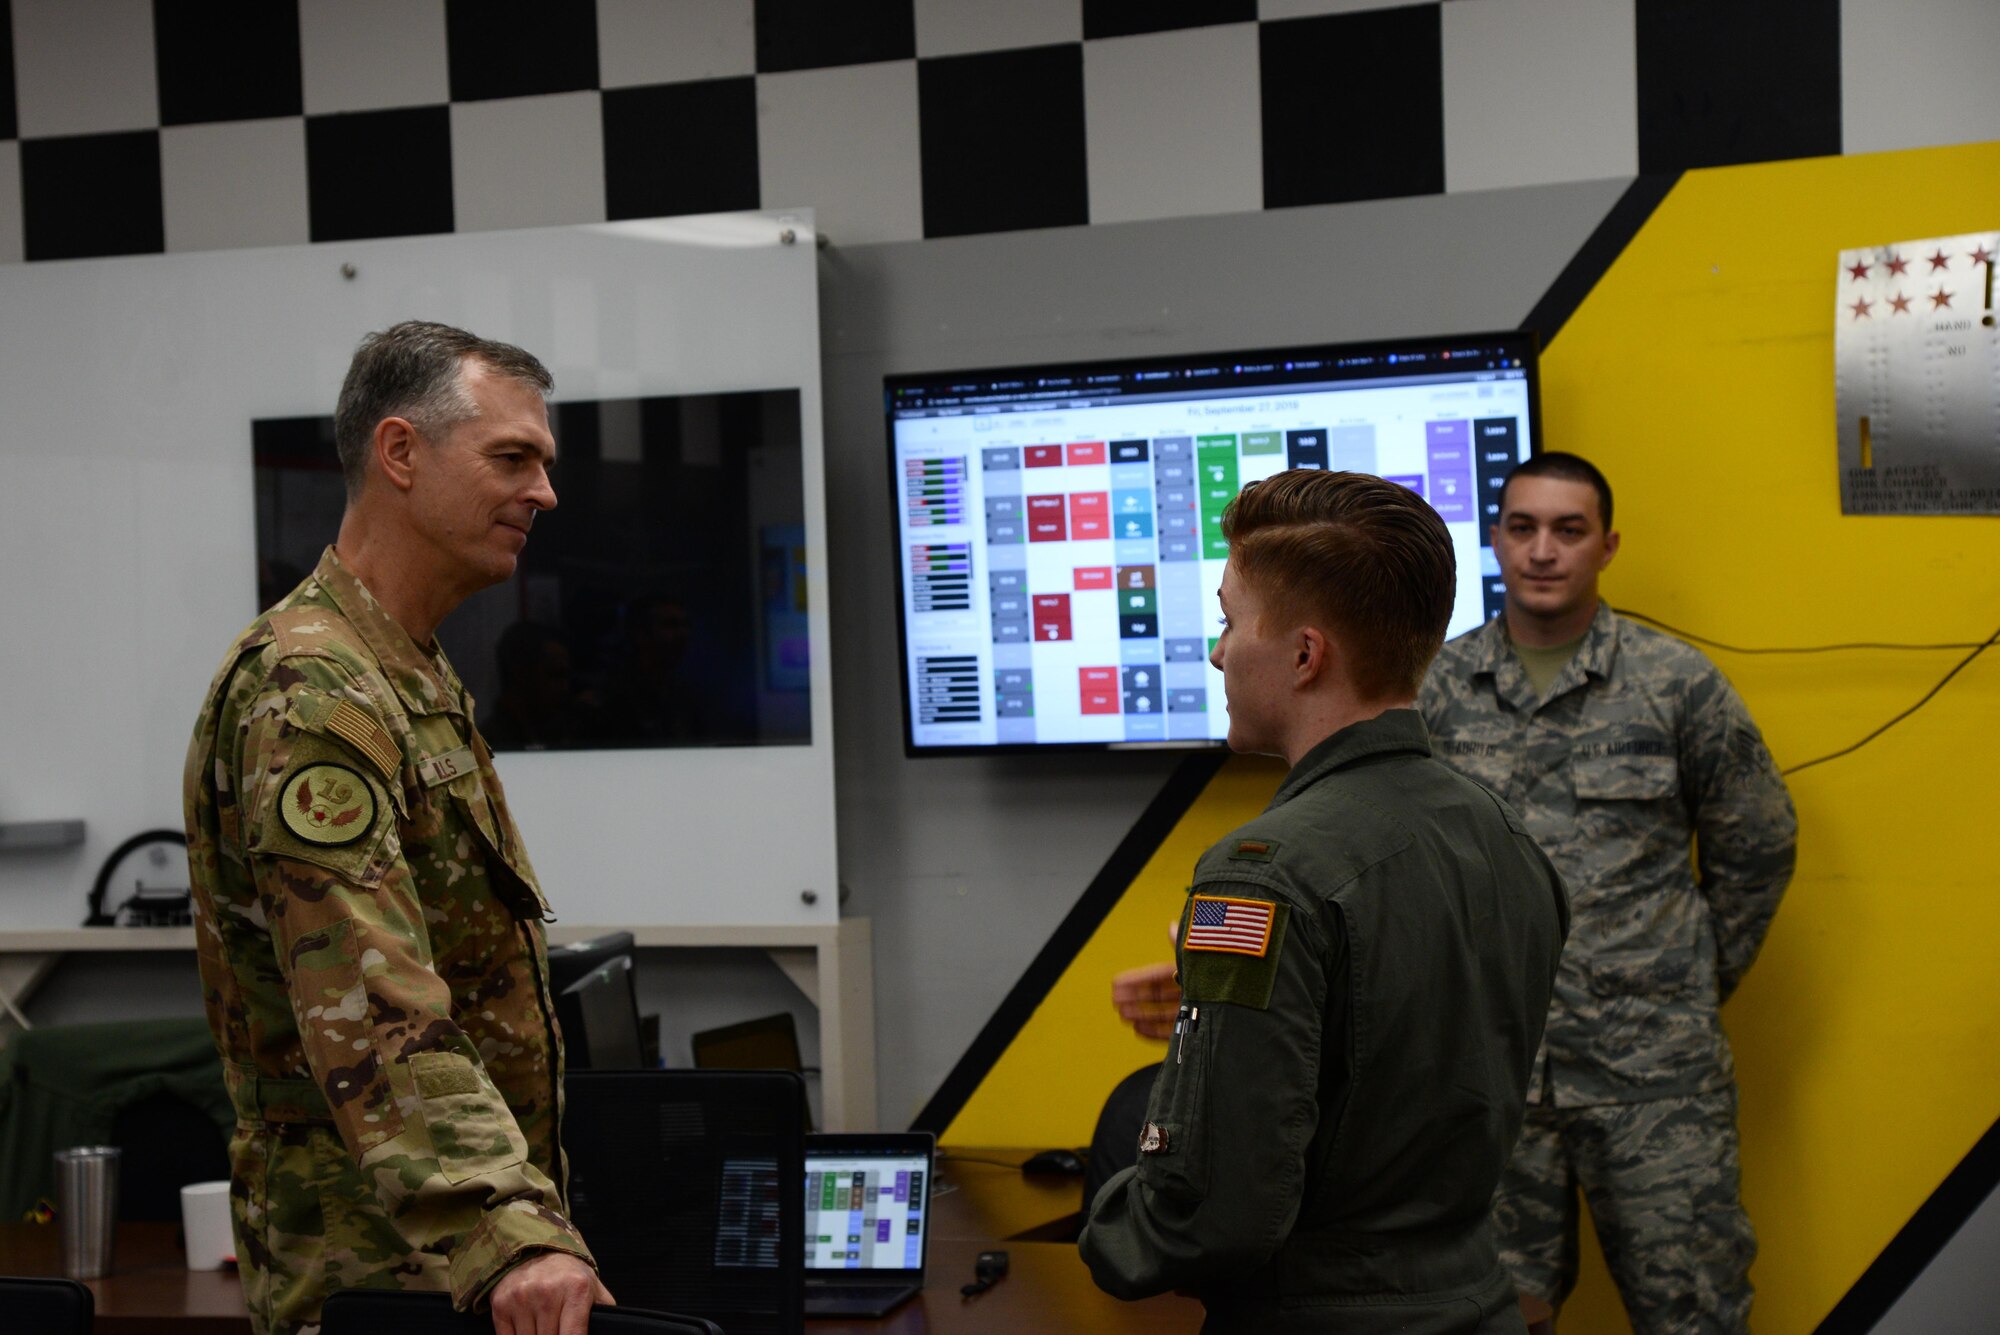 Maj. Gen. Craig Wills, 19th Air Force commander, and 2nd Lt. Michelle Strickland, 37th Flying Training Squadron student pilot, discuss her recent achievements in the 2019 Inter Service Alpha Warrior Final Battle Oct. 1, 2019, on Columbus Air Force Base, Miss. For Strickland’s recent achievements in the Alpha Warrior competition, she was recognized as an outstanding member of her squadron and was later coined by Wills. (U.S. Air Force photo by Airman 1st Class Jake Jacobsen)